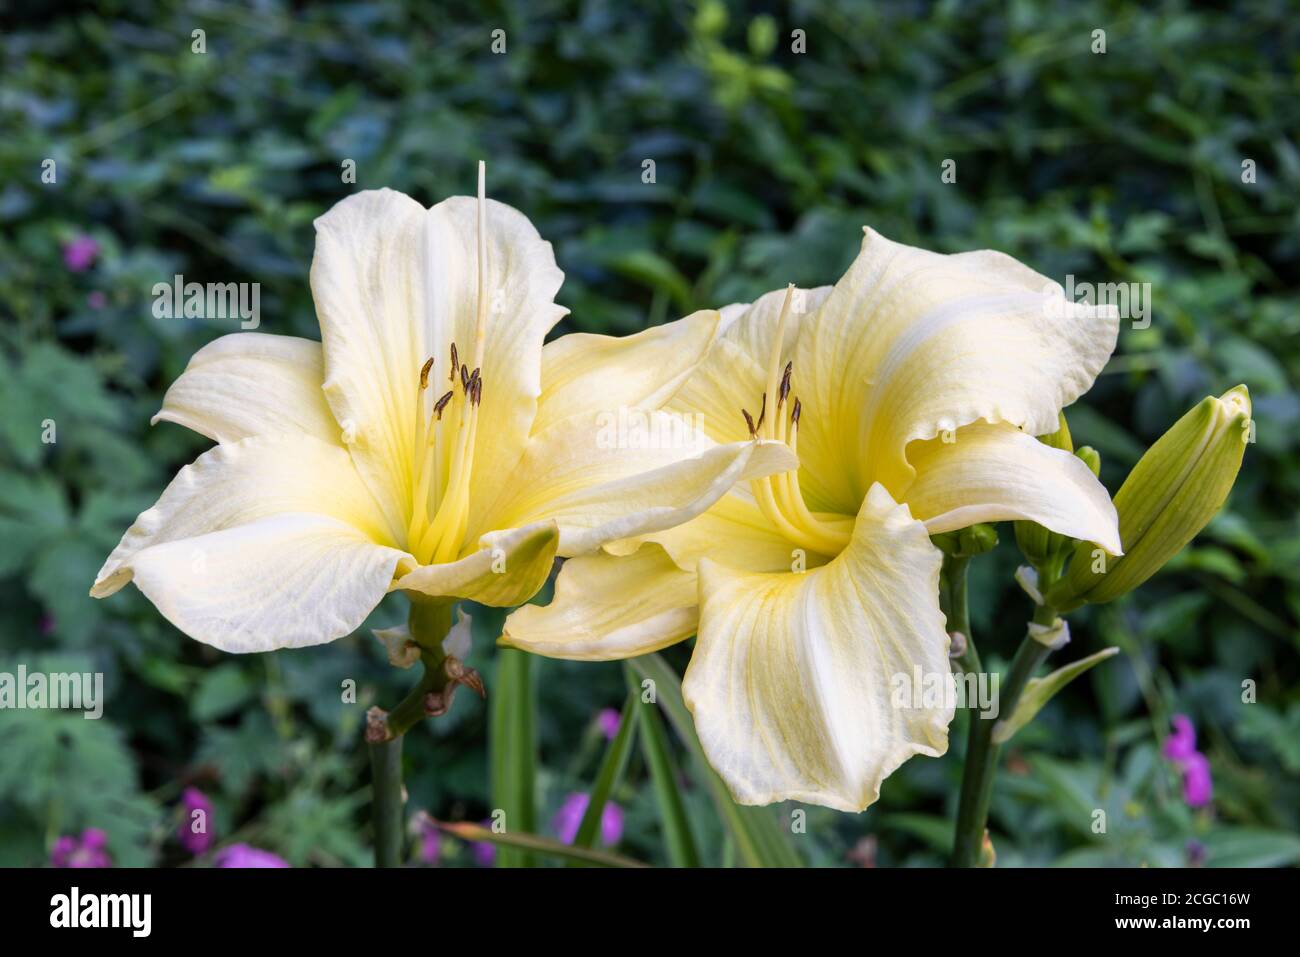 Close up of two pale lemon yellow flowers of Daylily, Hemerocallis 'Iron Gate Glacier', with blurred herbaceous border foliage in background Stock Photo